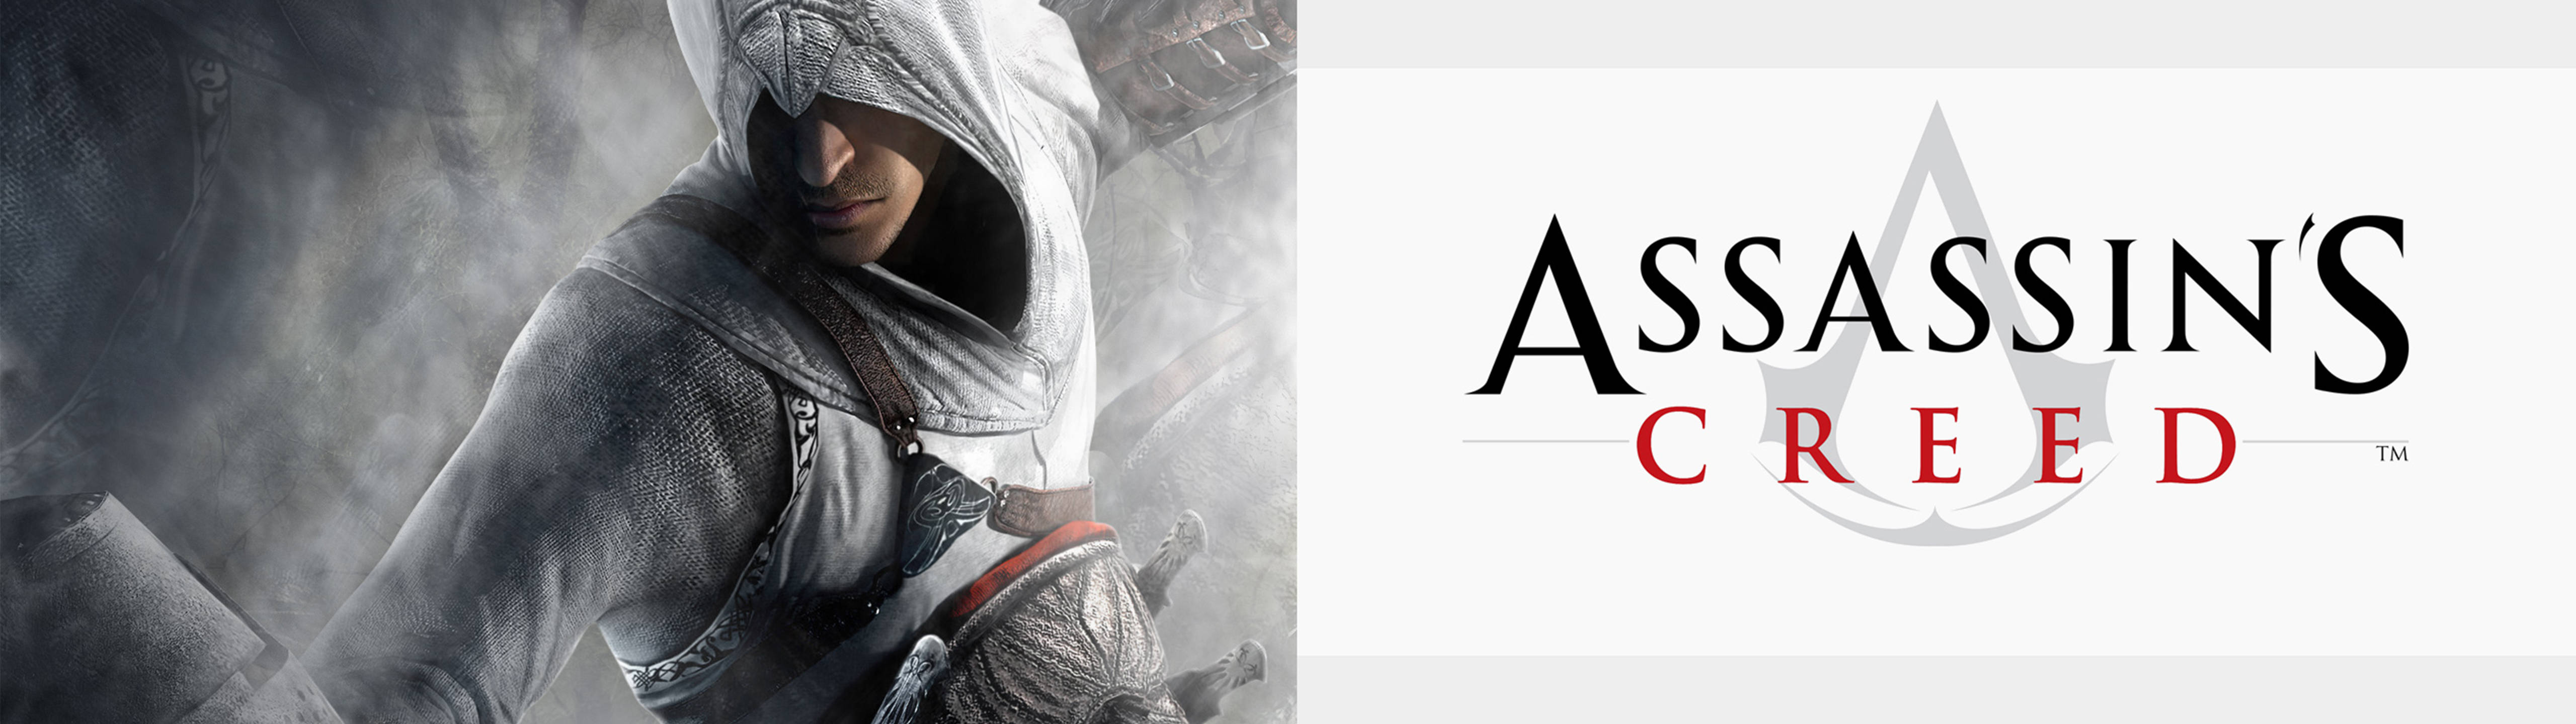 5120x1440 Game Assassin's Creed Wallpaper